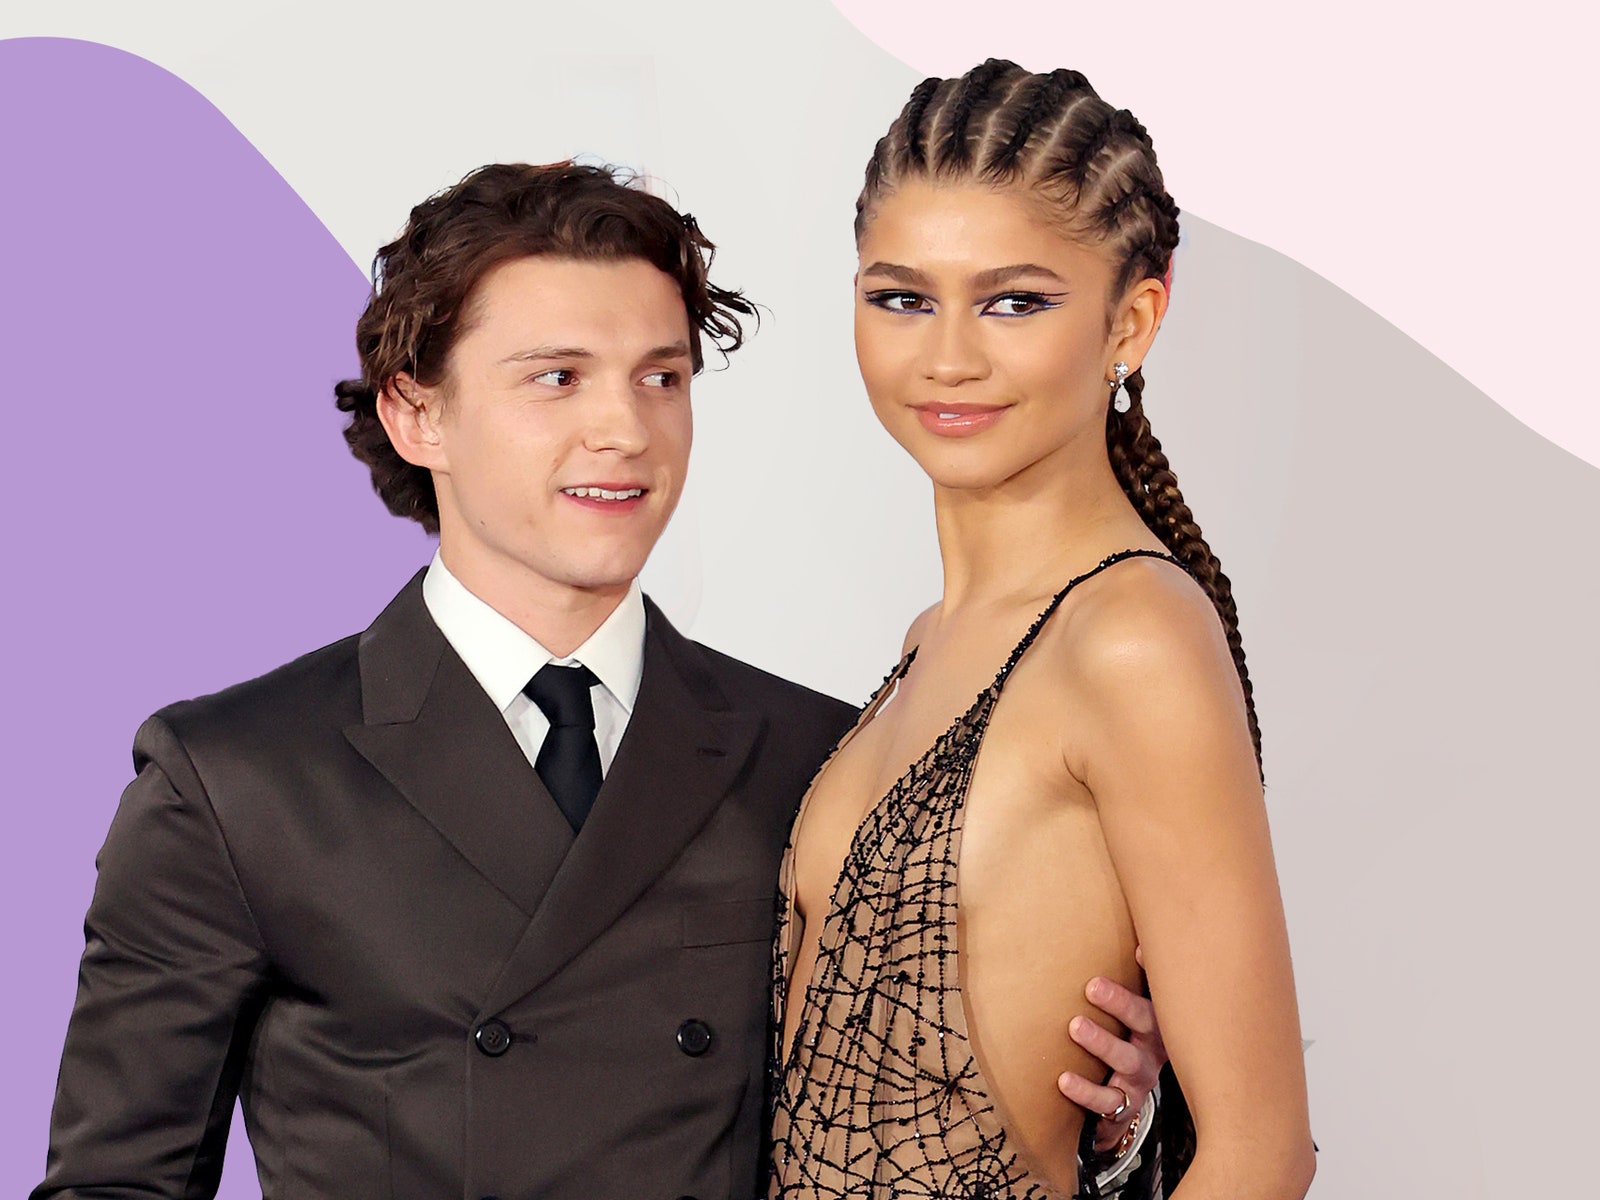 Zendaya and Tom Holland definitely understood all the assignments at Beyoncé’s concert